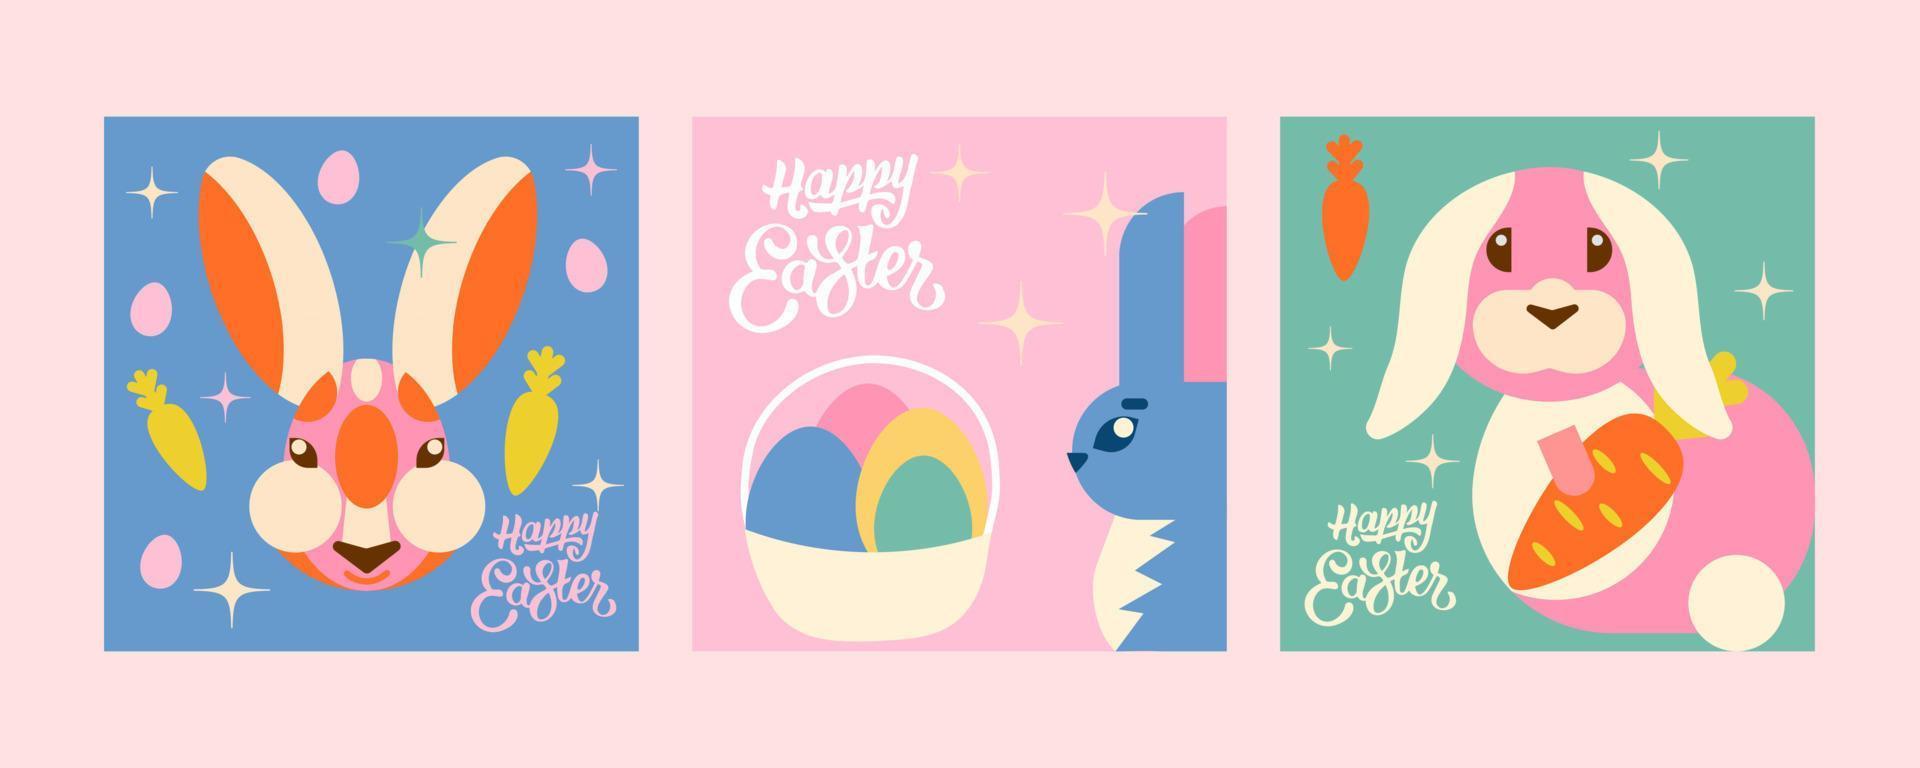 3 templates with bunnies for Easter. The minimalist design is made in a modern style and an interesting combination of pastel colors. These rabbits will make a great addition to your project vector